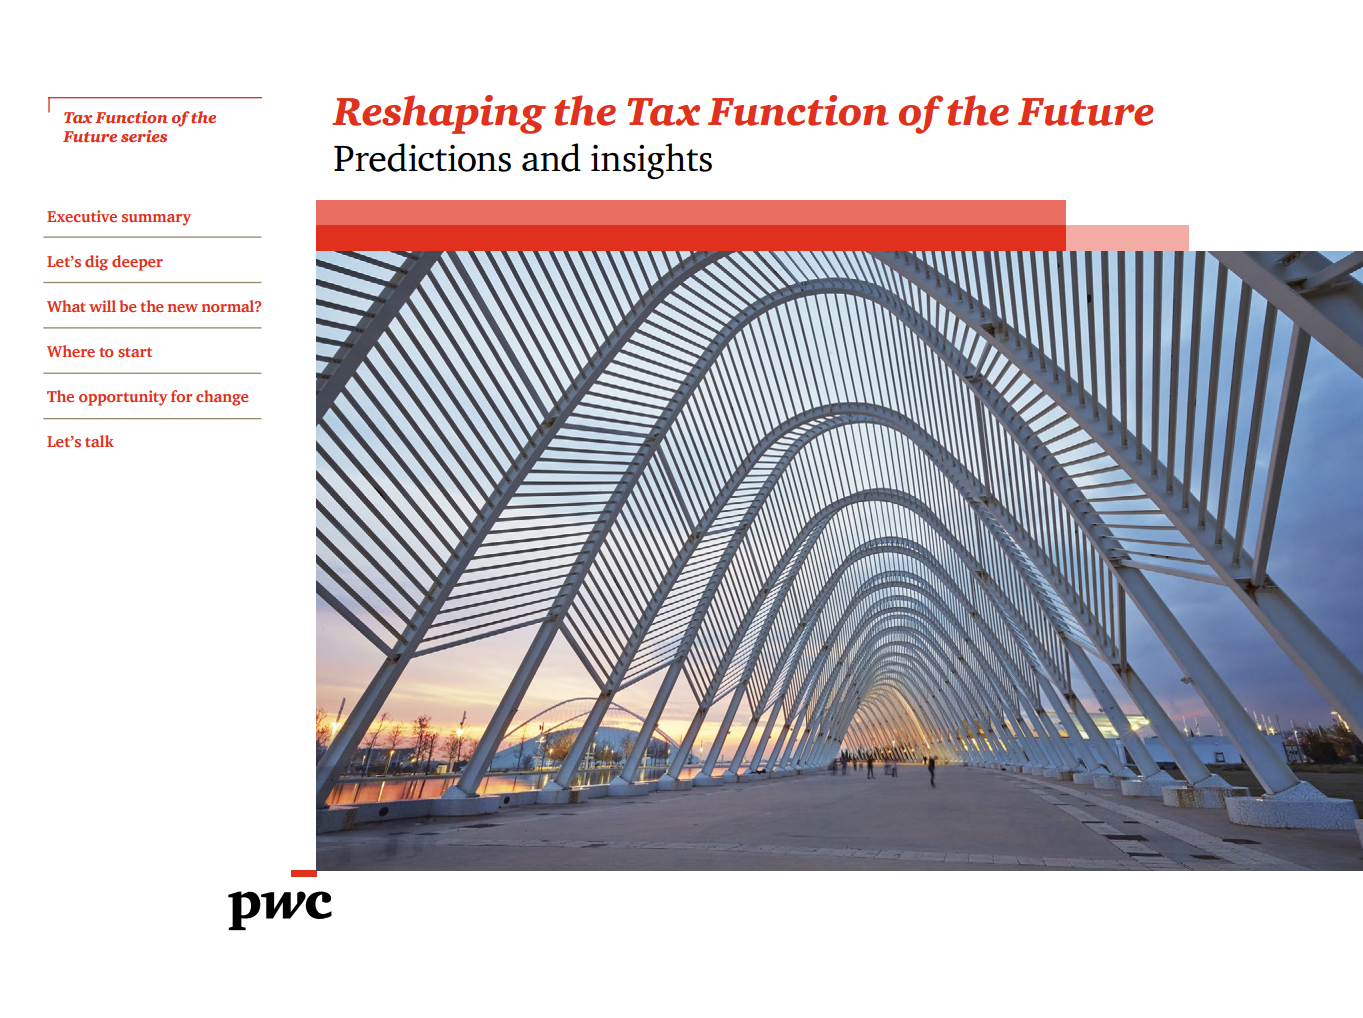 Download the PwC report